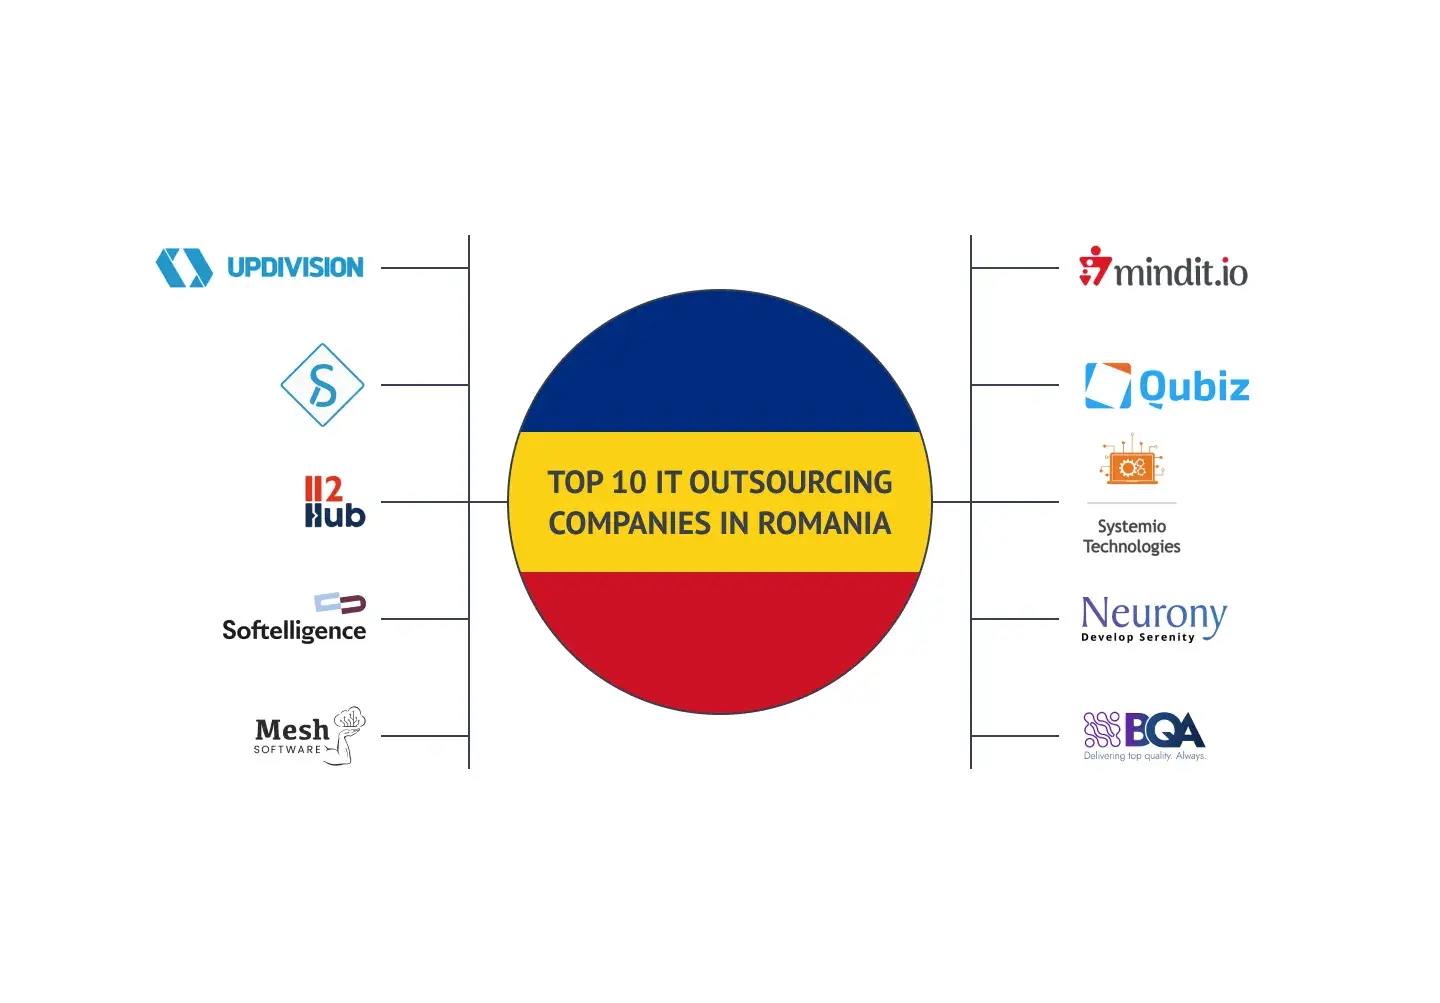 Top IT outsourcing companies in Romania